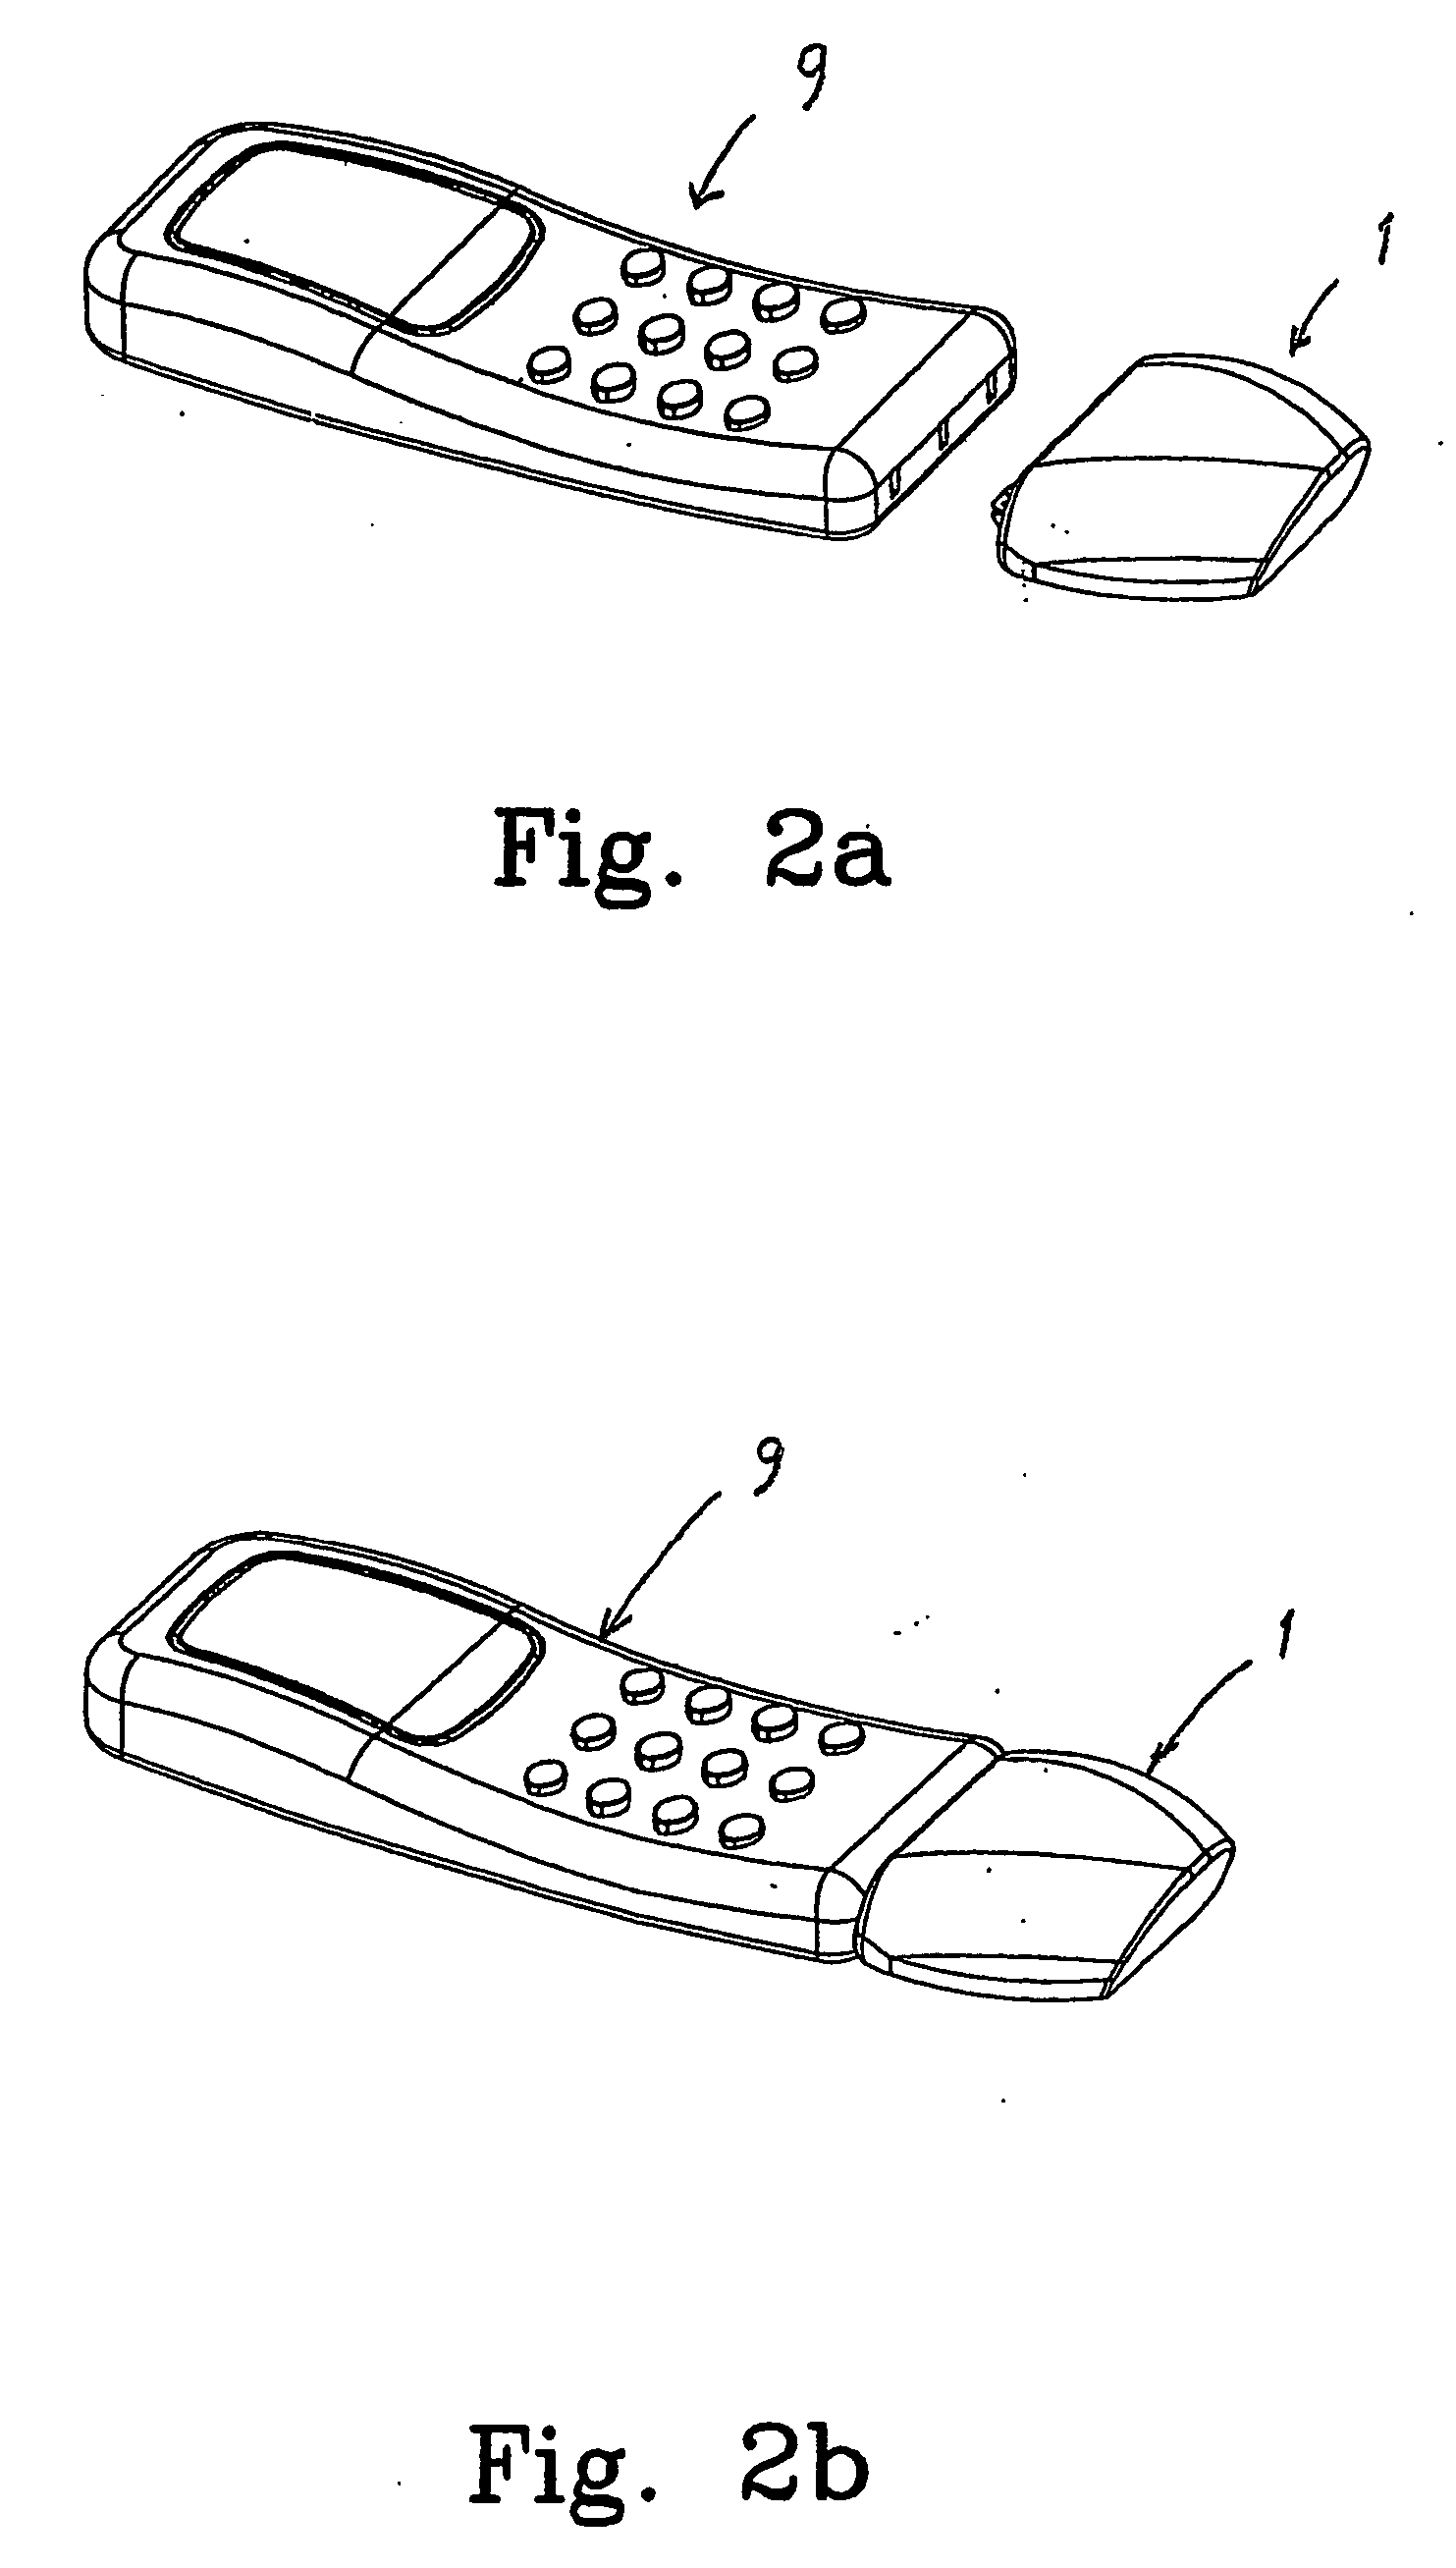 Handheld printing device connectable to a mobile unit